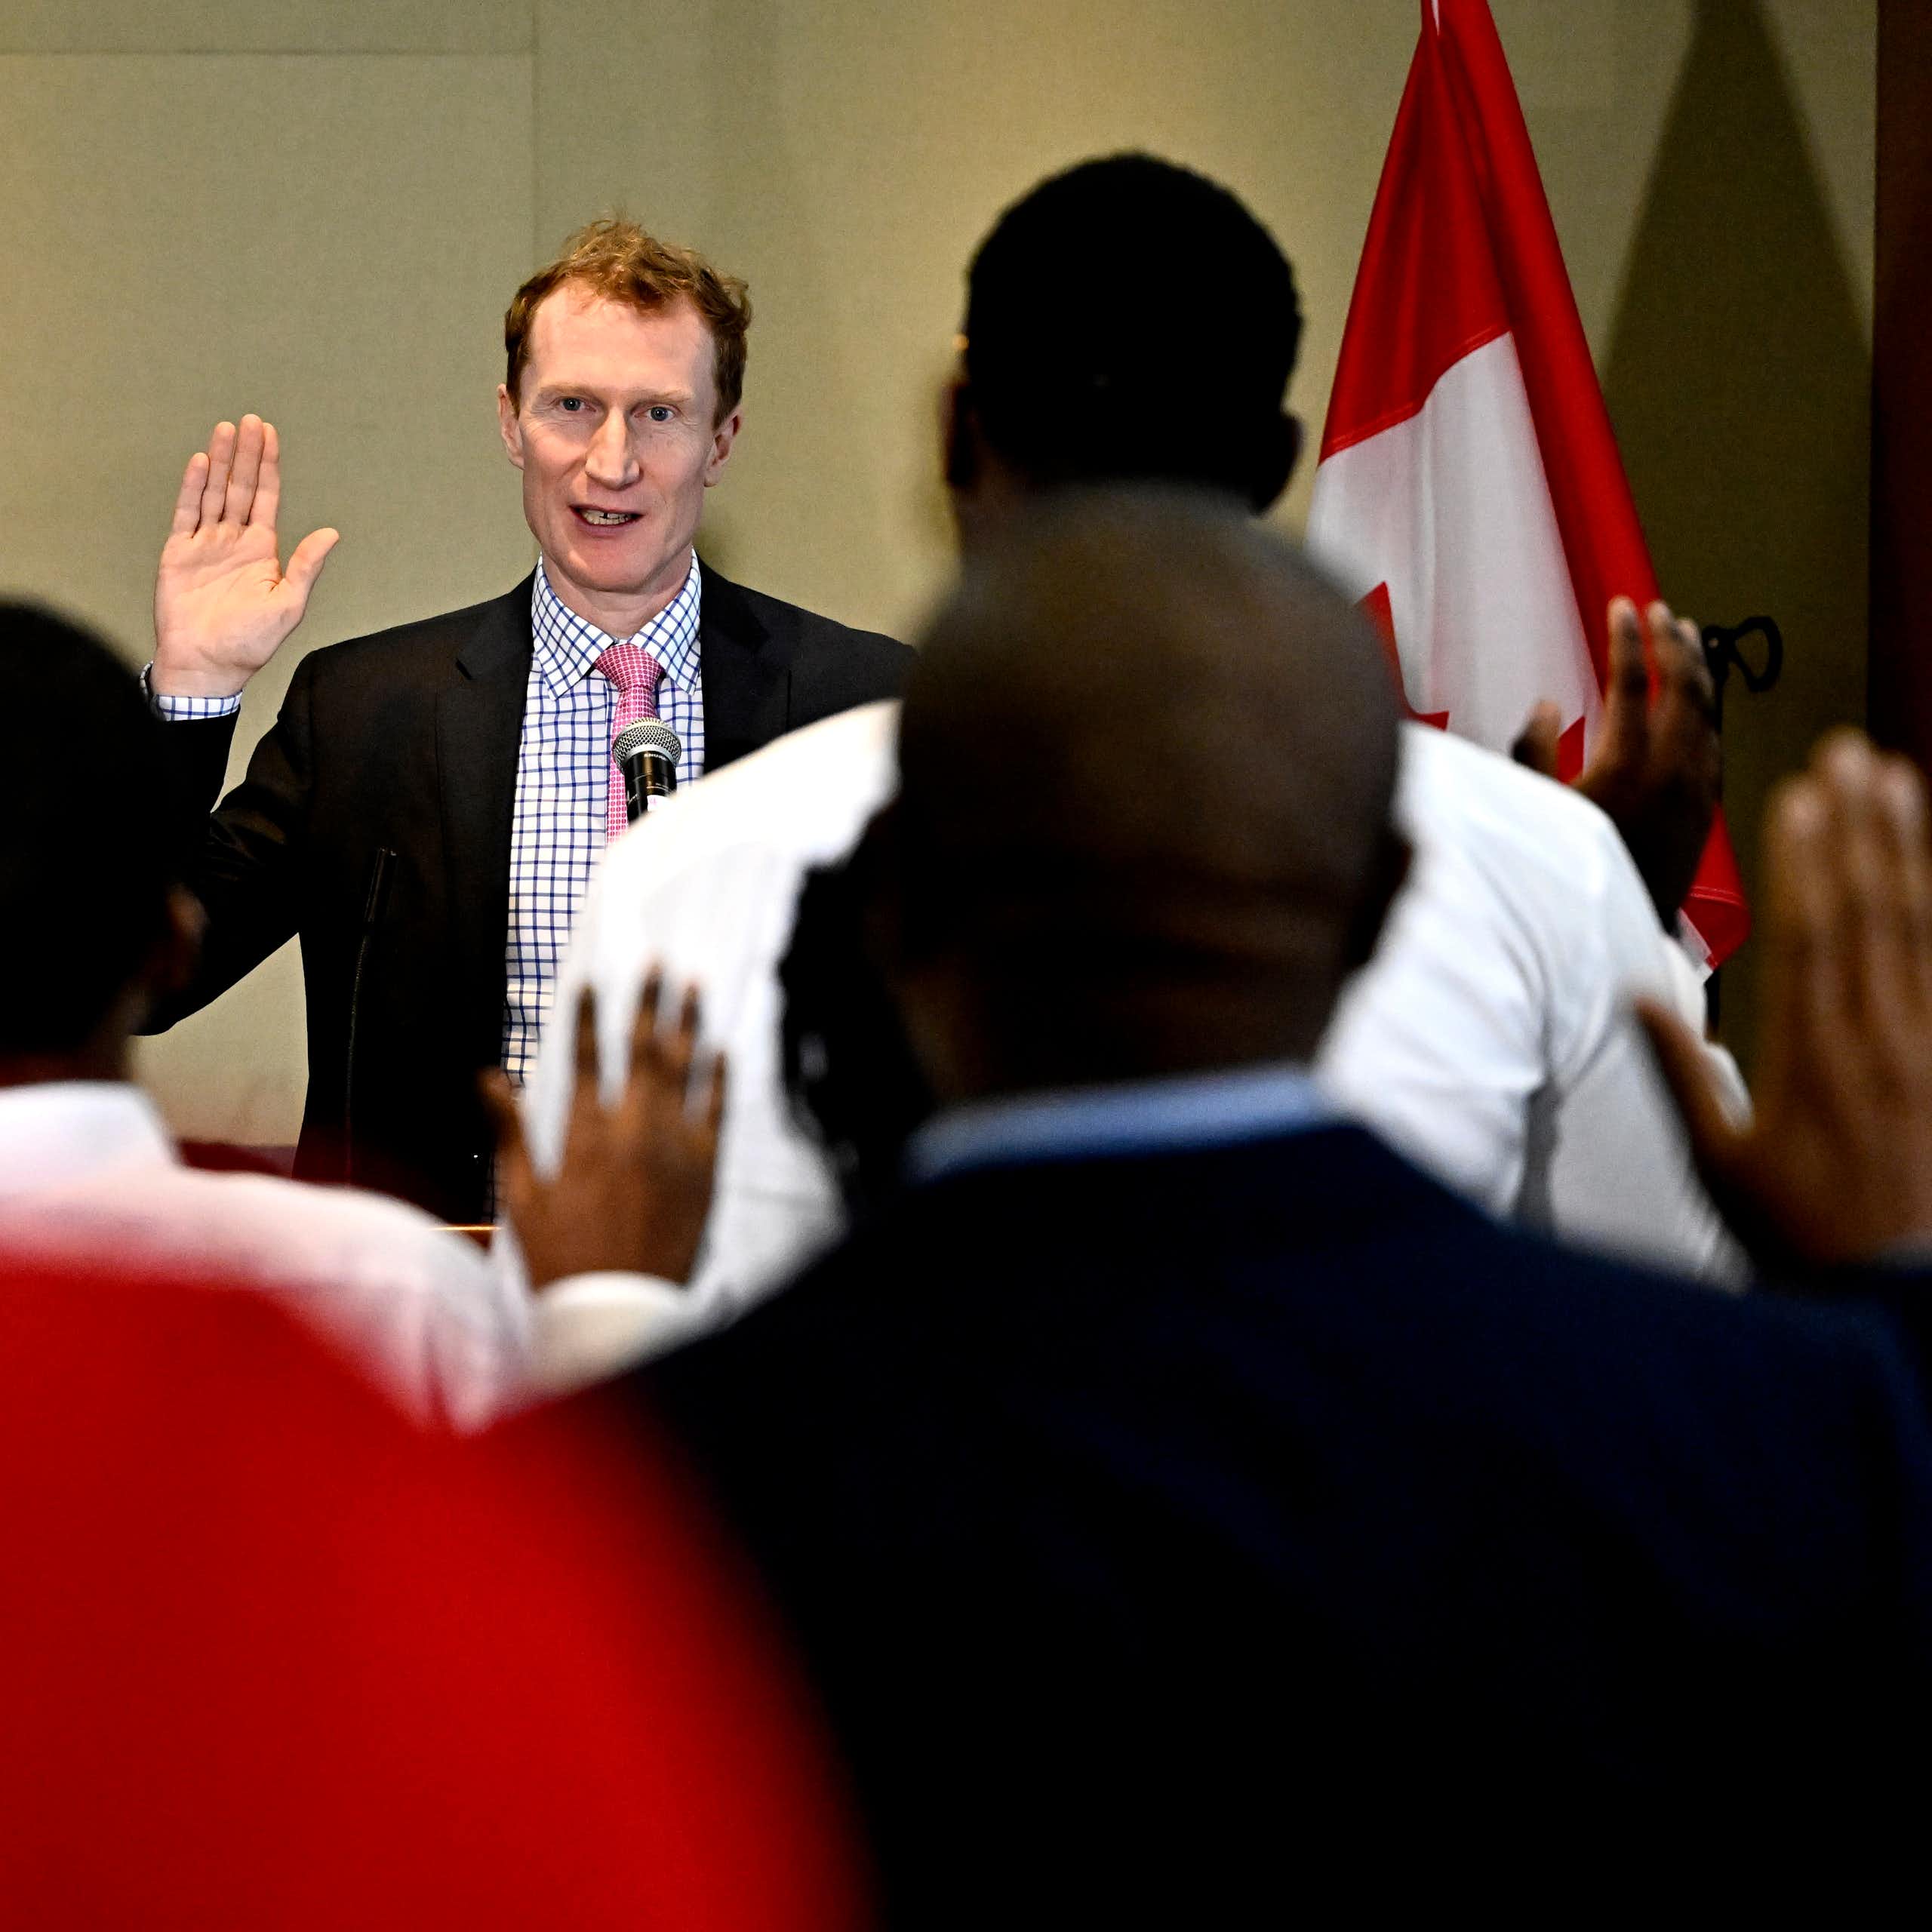 A man with red hair raises his hand as racialized people are photographed from behind raising their hands.